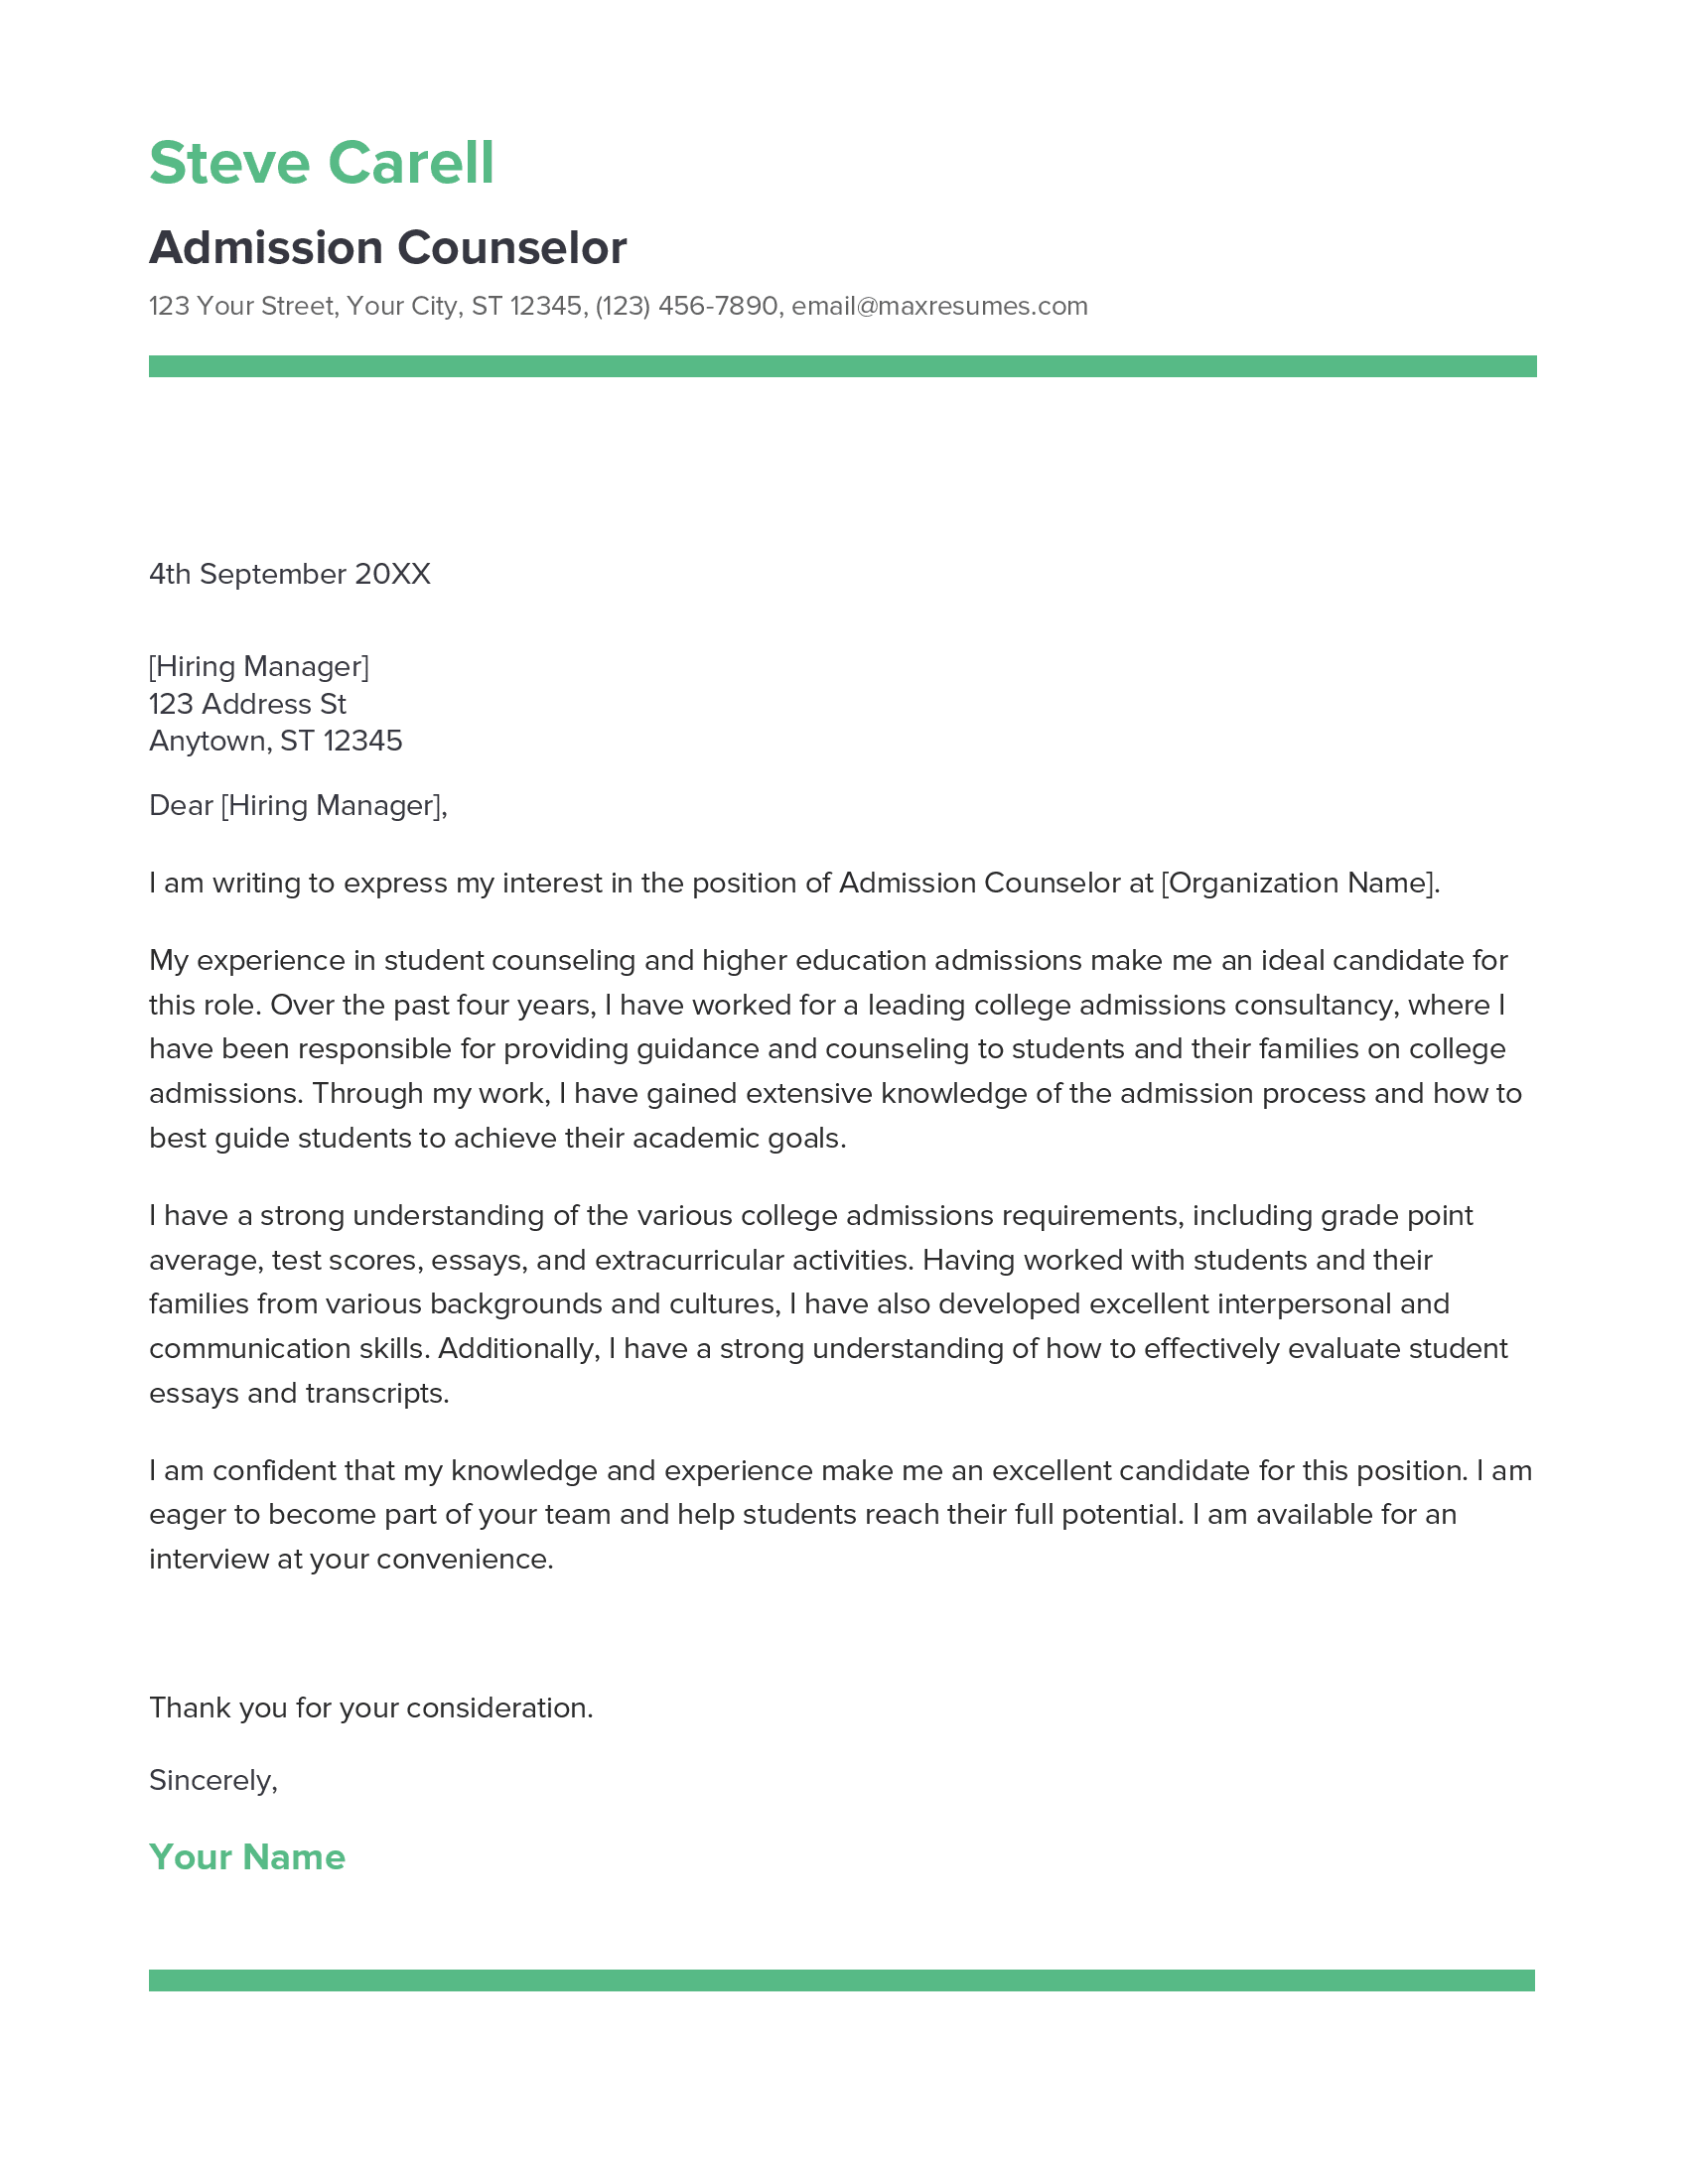 Admission Counselor Cover Letter Example